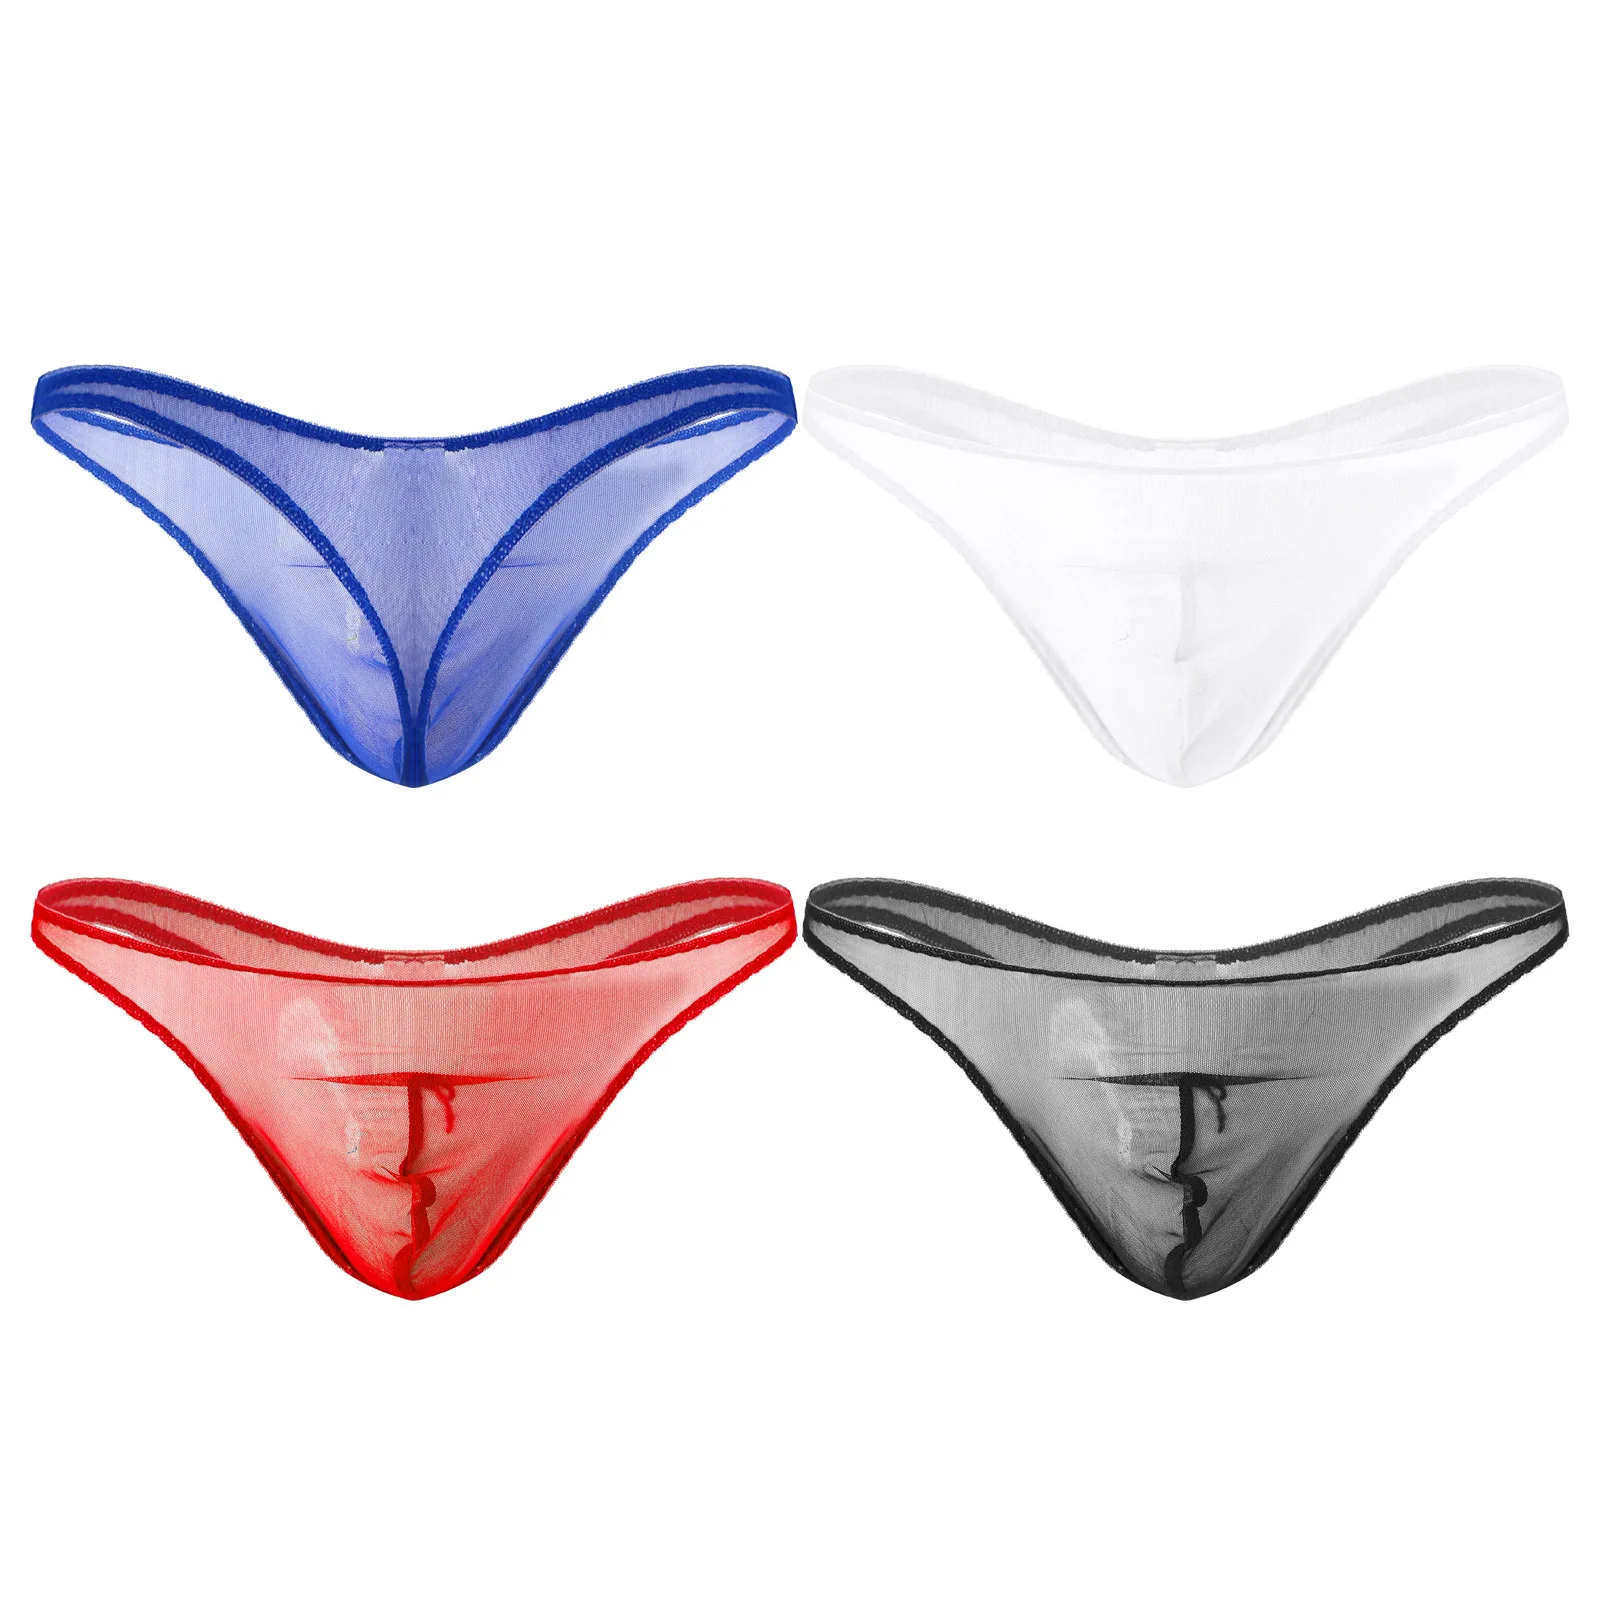 mens sheer briefs Mens Mesh Briefs Sexy See through Sheer T-Back G-String Thong Lingerie Gay Sissy Transparent Ultra-Thin Panties Underwear boxer briefs with pouch